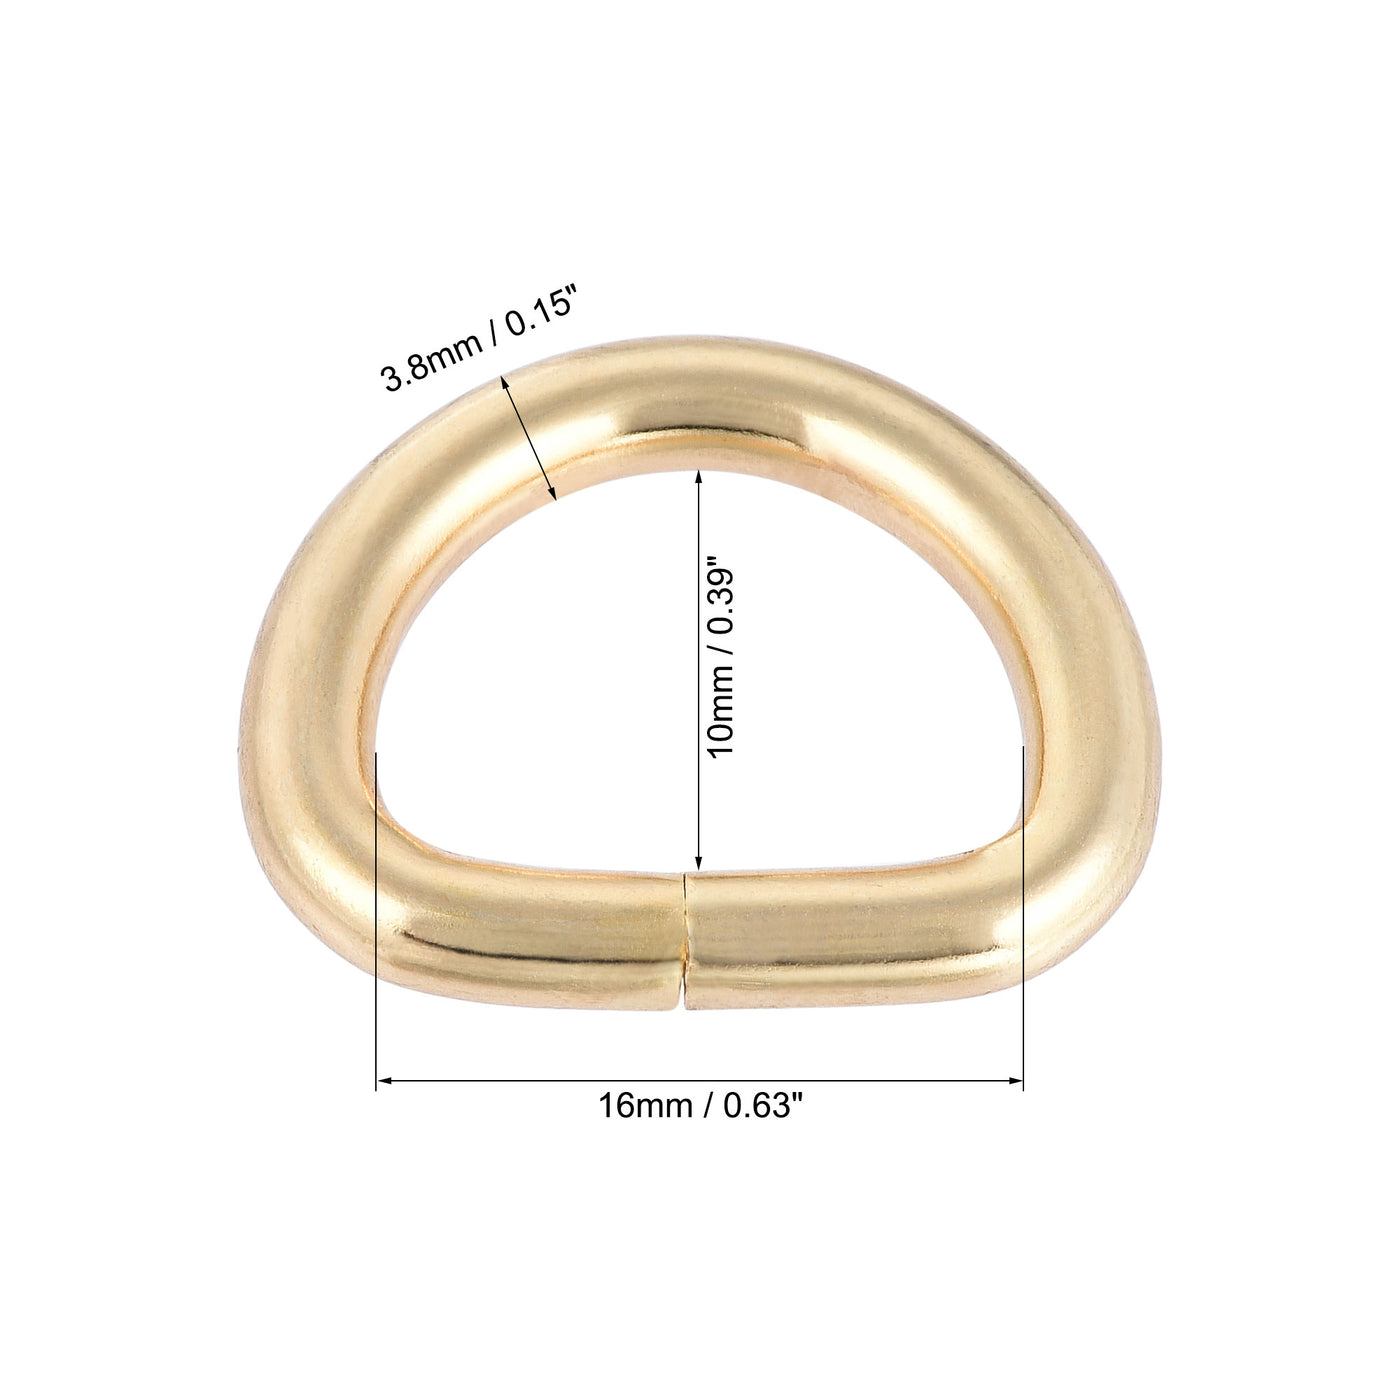 uxcell Uxcell Metal D Ring 0.63"(16mm) D-Rings Buckle for Hardware Bags Belts Craft DIY Accessories Gold Tone 50pcs